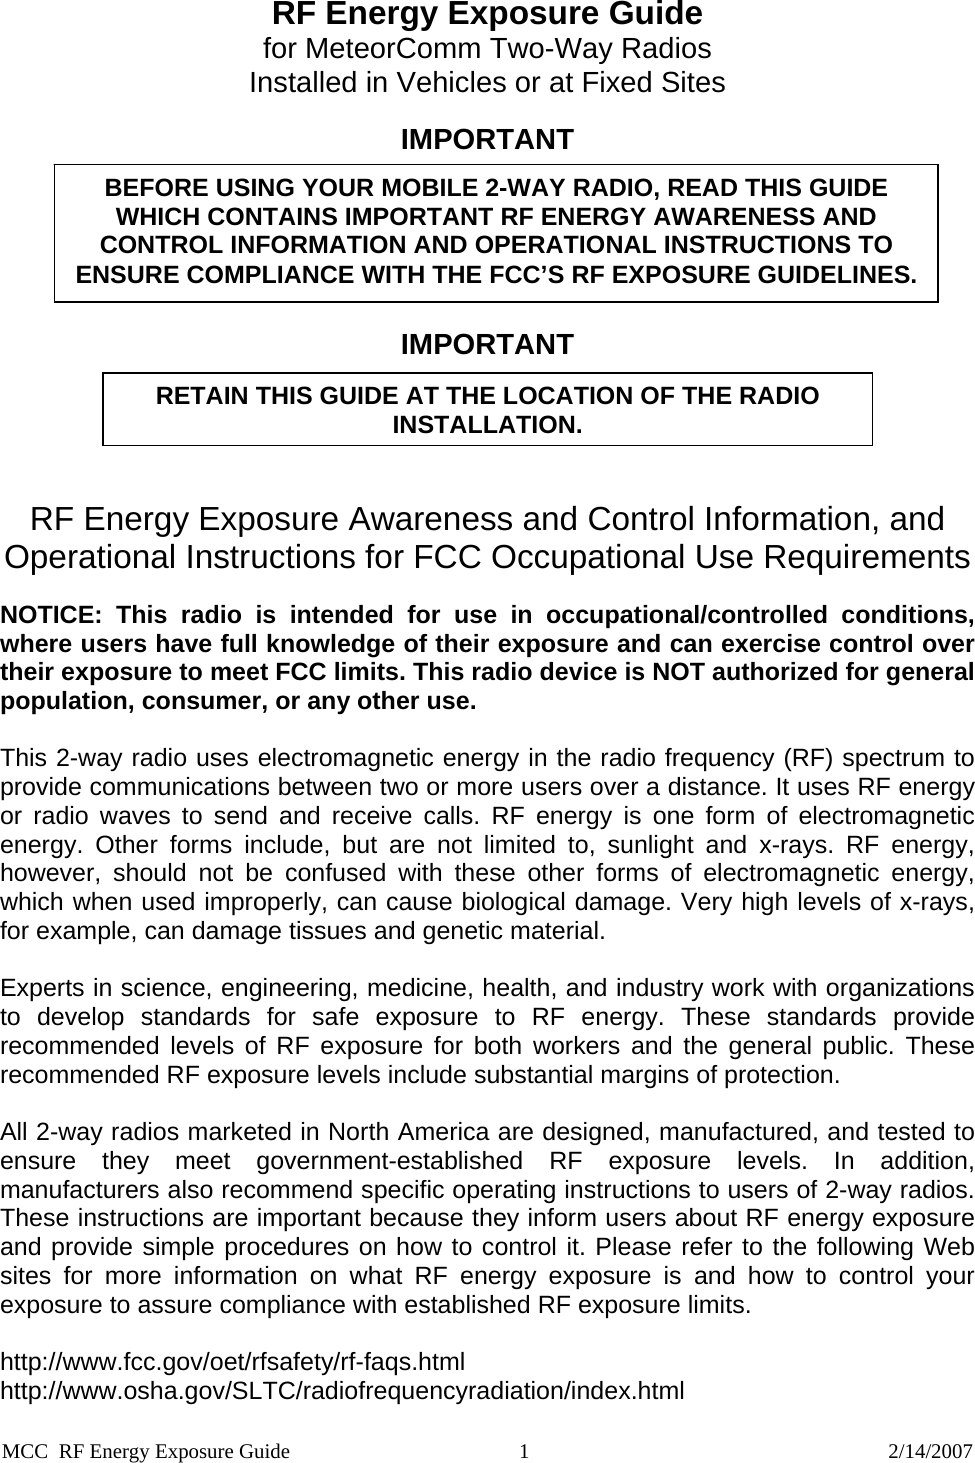 RF Energy Exposure Guide  for MeteorComm Two-Way Radios  Installed in Vehicles or at Fixed Sites  IMPORTANT BEFORE USING YOUR MOBILE 2-WAY RADIO, READ THIS GUIDE WHICH CONTAINS IMPORTANT RF ENERGY AWARENESS AND CONTROL INFORMATION AND OPERATIONAL INSTRUCTIONS TO ENSURE COMPLIANCE WITH THE FCC’S RF EXPOSURE GUIDELINES.  IMPORTANT  RETAIN THIS GUIDE AT THE LOCATION OF THE RADIO INSTALLATION.   RF Energy Exposure Awareness and Control Information, and Operational Instructions for FCC Occupational Use Requirements  NOTICE: This radio is intended for use in occupational/controlled conditions, where users have full knowledge of their exposure and can exercise control over their exposure to meet FCC limits. This radio device is NOT authorized for general population, consumer, or any other use.  This 2-way radio uses electromagnetic energy in the radio frequency (RF) spectrum to provide communications between two or more users over a distance. It uses RF energy or radio waves to send and receive calls. RF energy is one form of electromagnetic energy. Other forms include, but are not limited to, sunlight and x-rays. RF energy, however, should not be confused with these other forms of electromagnetic energy, which when used improperly, can cause biological damage. Very high levels of x-rays, for example, can damage tissues and genetic material.  Experts in science, engineering, medicine, health, and industry work with organizations to develop standards for safe exposure to RF energy. These standards provide recommended levels of RF exposure for both workers and the general public. These recommended RF exposure levels include substantial margins of protection.  All 2-way radios marketed in North America are designed, manufactured, and tested to ensure they meet government-established RF exposure levels. In addition, manufacturers also recommend specific operating instructions to users of 2-way radios. These instructions are important because they inform users about RF energy exposure and provide simple procedures on how to control it. Please refer to the following Web sites for more information on what RF energy exposure is and how to control your exposure to assure compliance with established RF exposure limits.  http://www.fcc.gov/oet/rfsafety/rf-faqs.html http://www.osha.gov/SLTC/radiofrequencyradiation/index.html MCC  RF Energy Exposure Guide                                            1                                                                     2/14/2007 